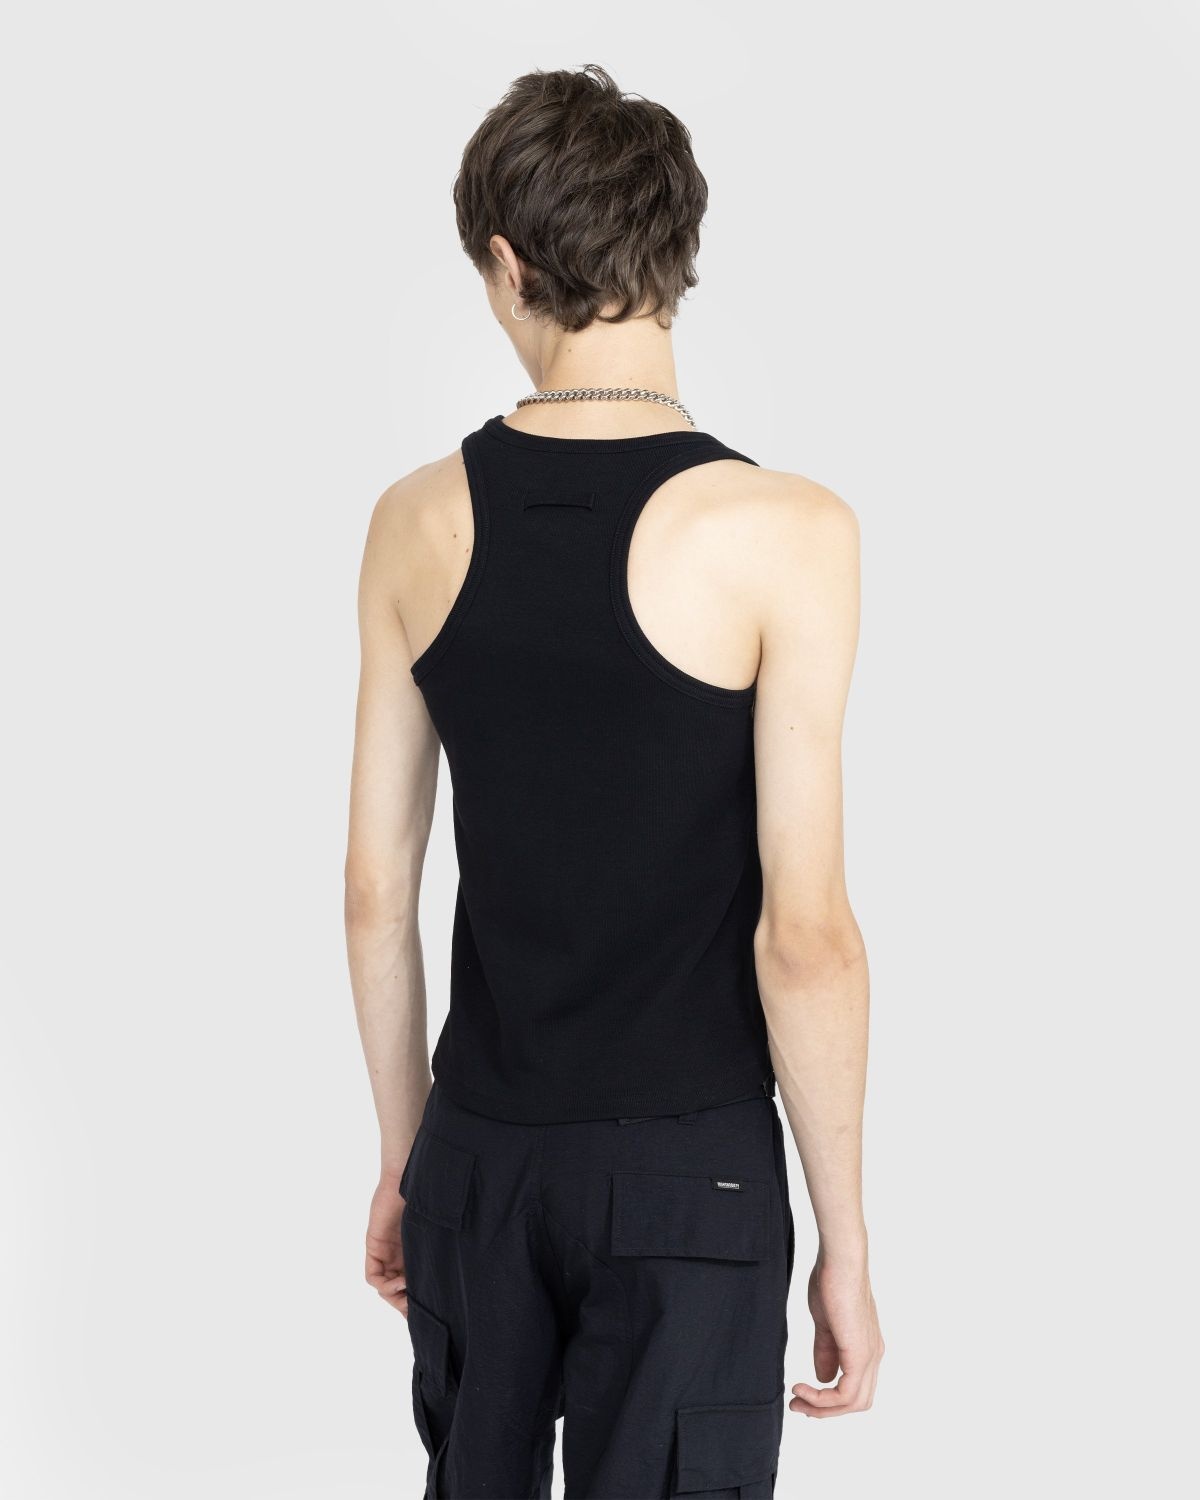 Jean Paul Gaultier – Tanktop With Laced Side Details Black - 3